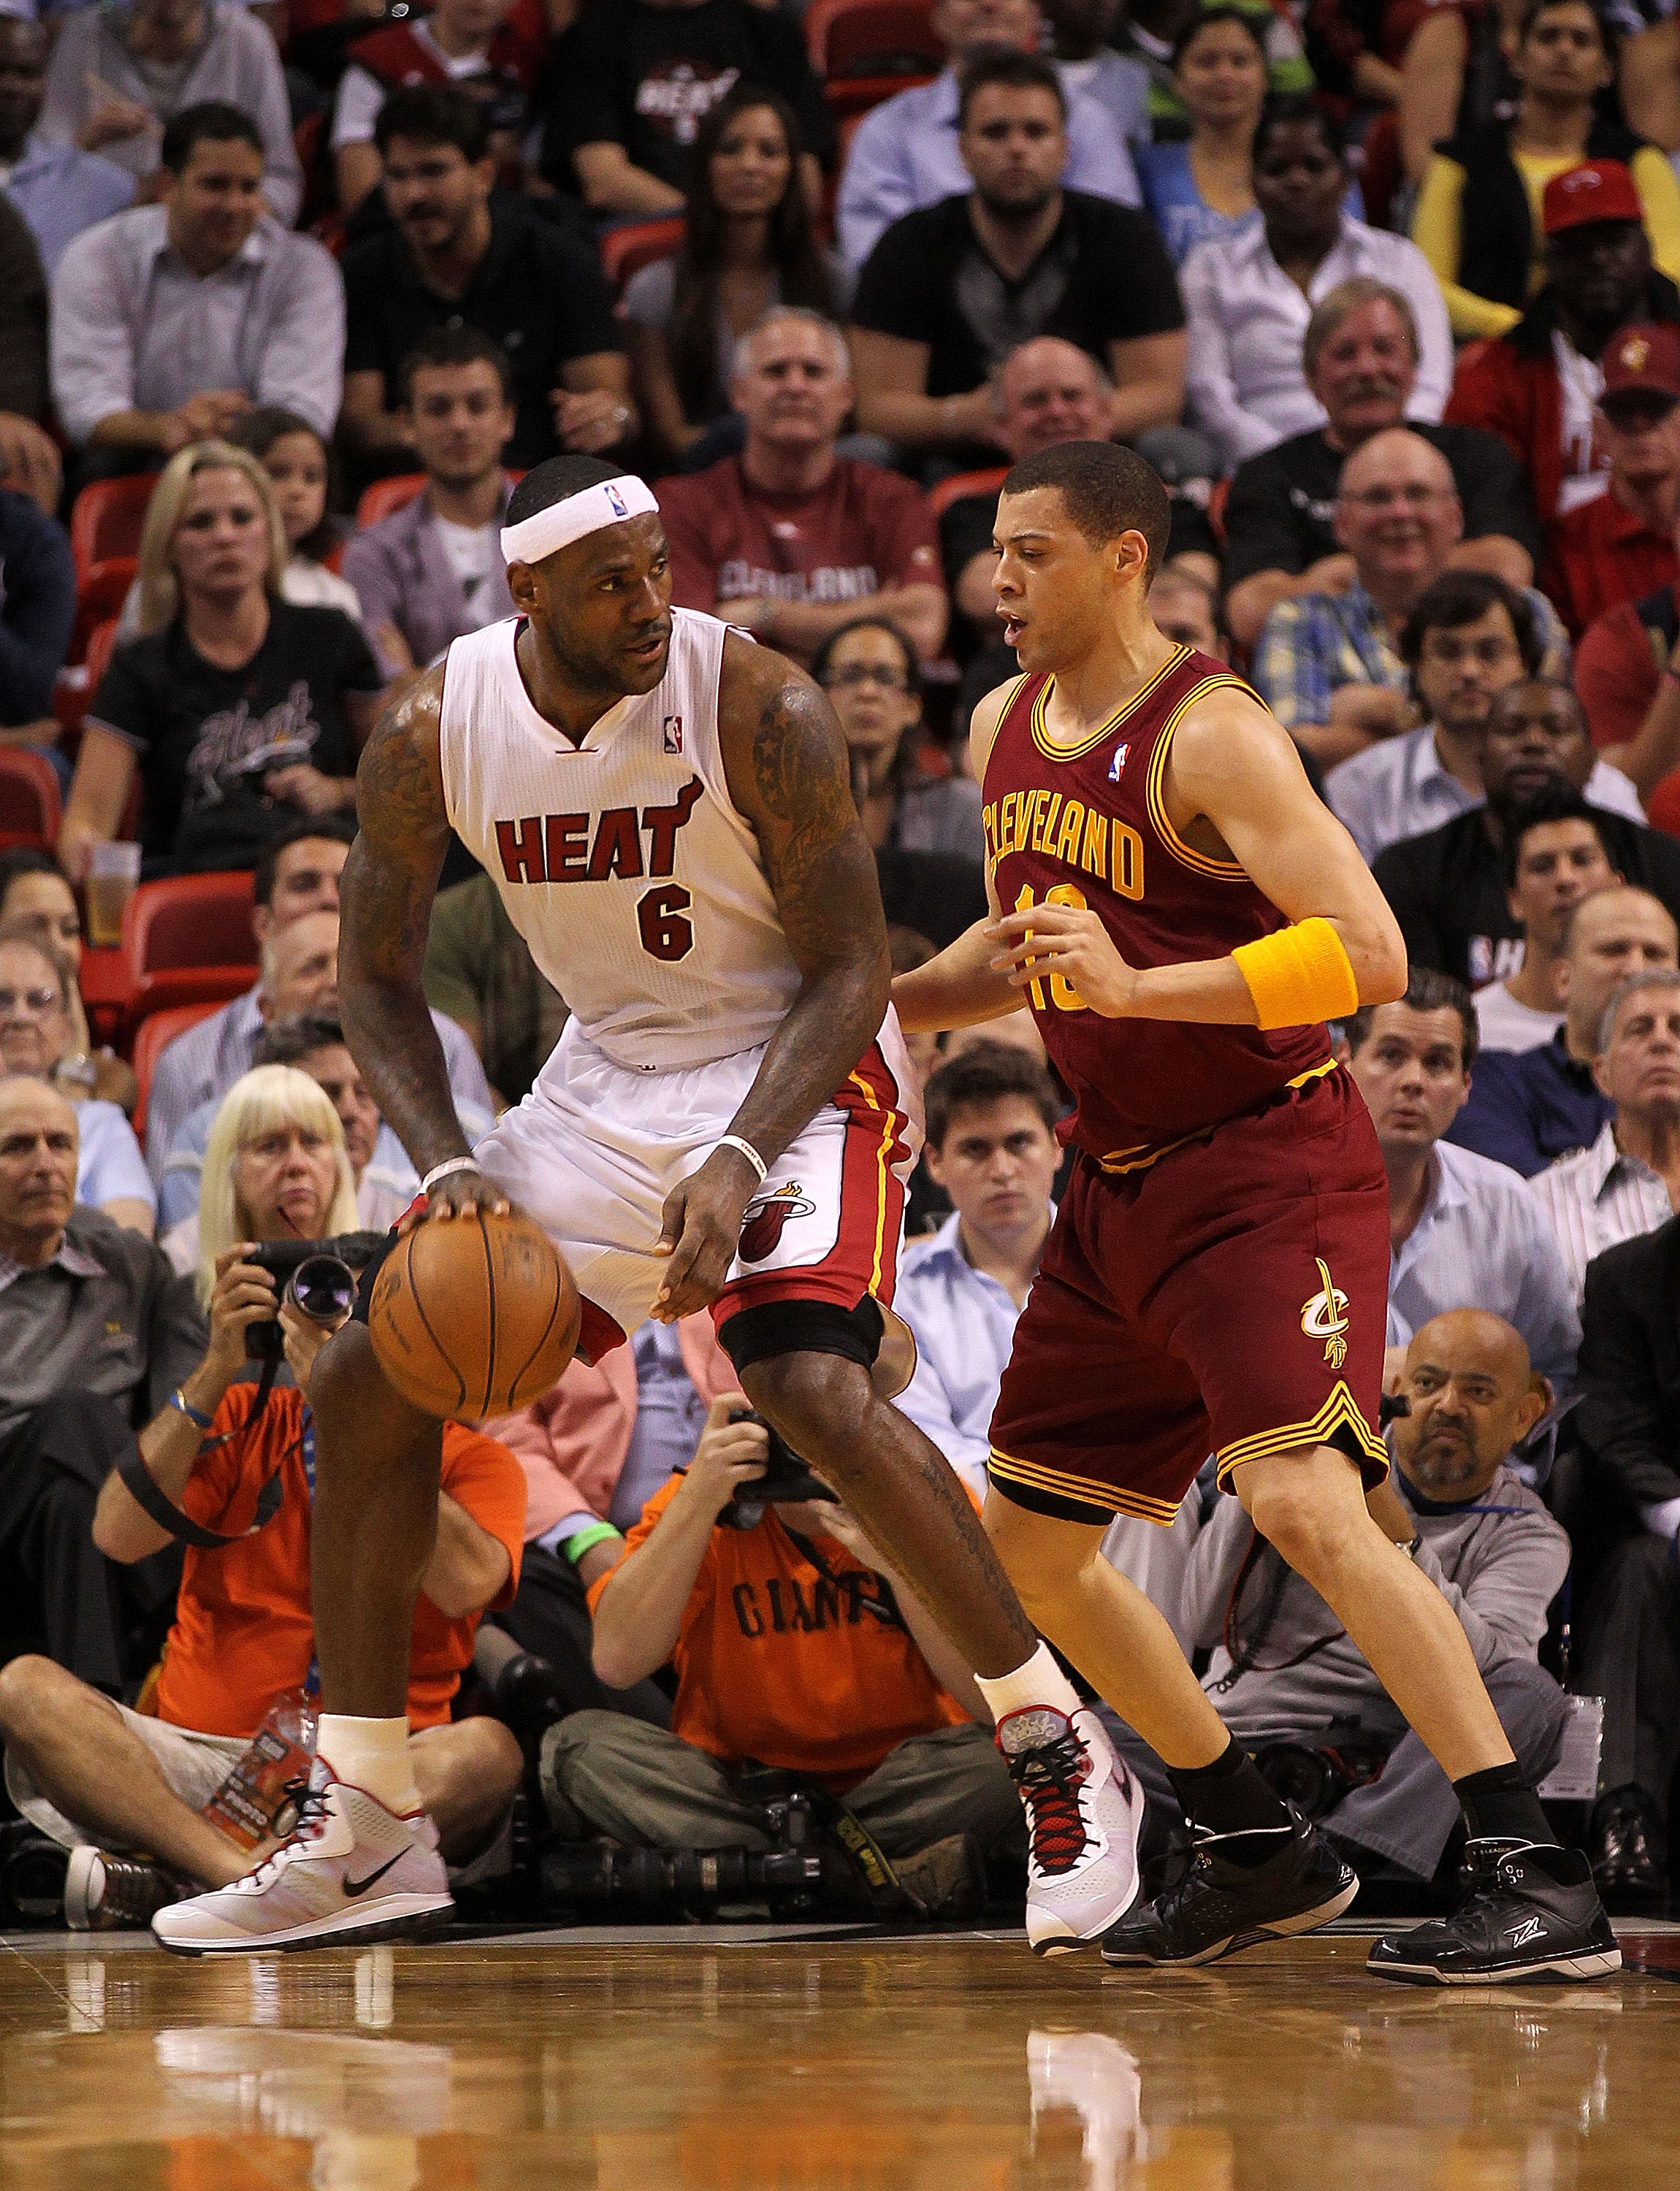 MIAMI, FL - JANUARY 31:  LeBron James #6 of the Miami Heat posts up Anthony Parker #18 of the Cleveland Cavaliers during a game at American Airlines Arena on January 31, 2011 in Miami, Florida. NOTE TO USER: User expressly acknowledges and agrees that, by